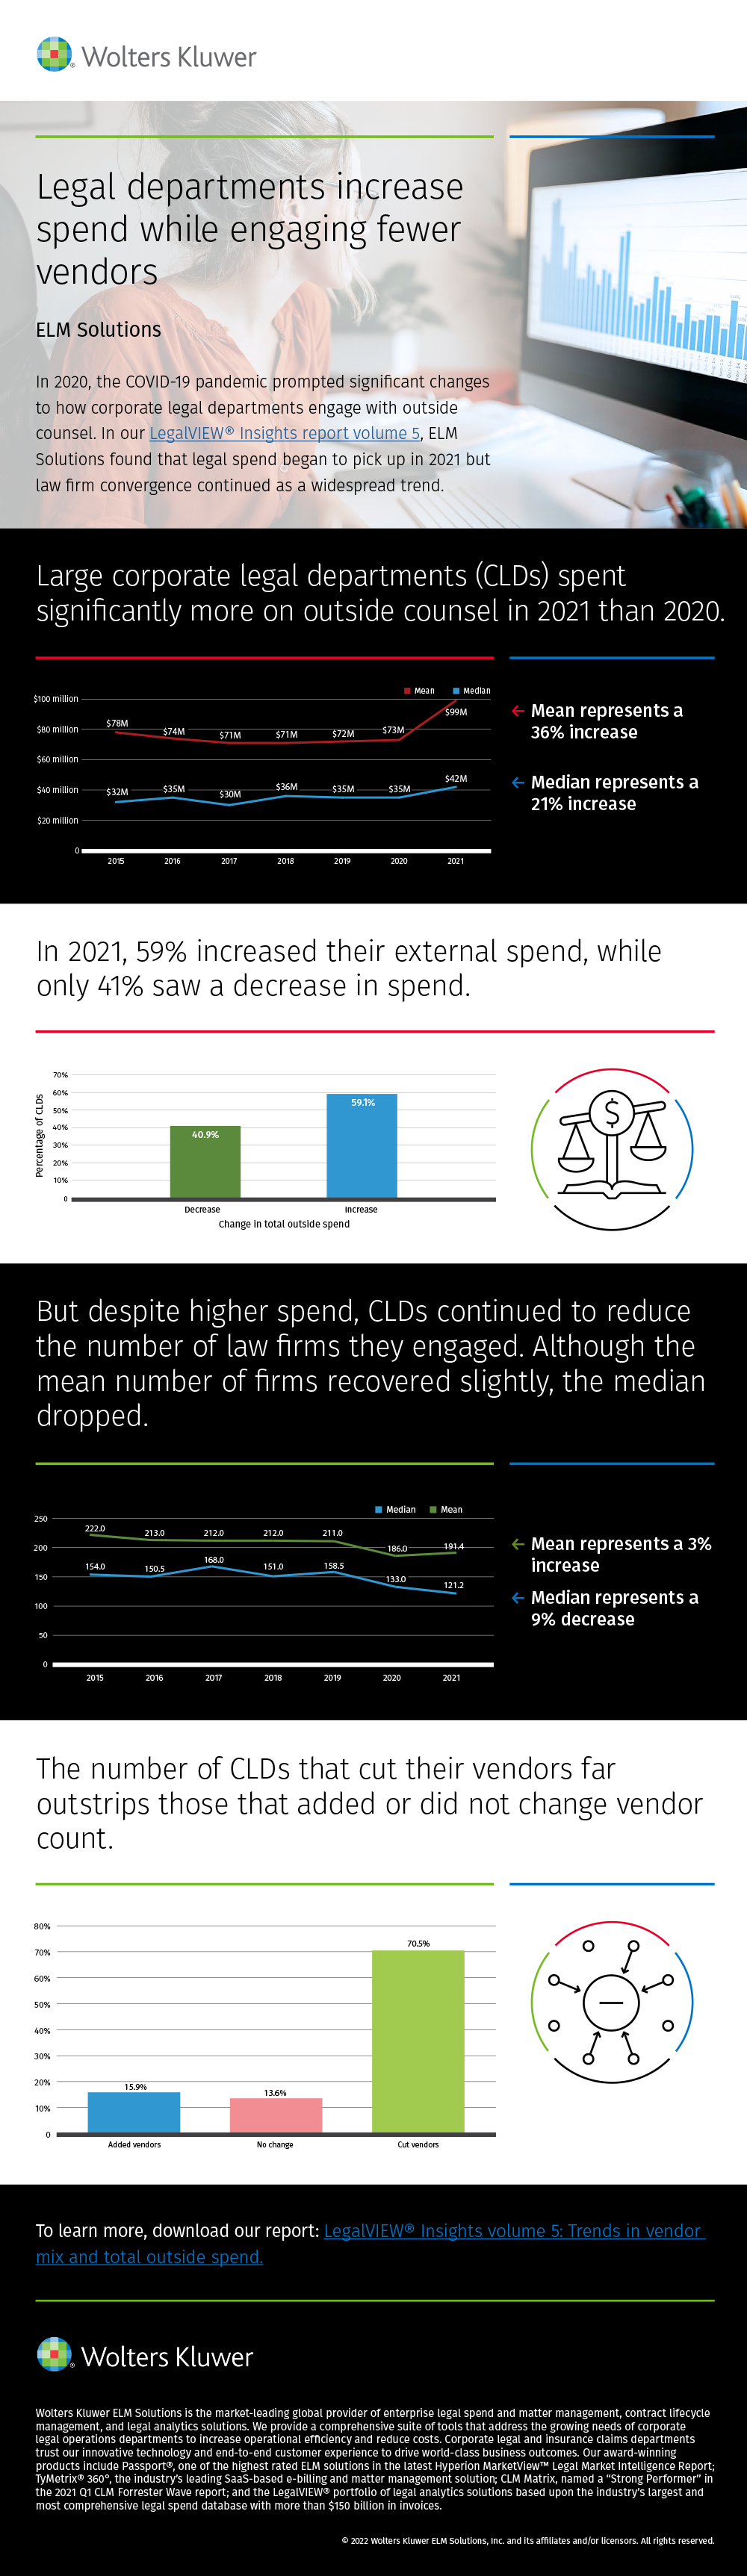 Legal departments increase spend while engaging fewer vendors